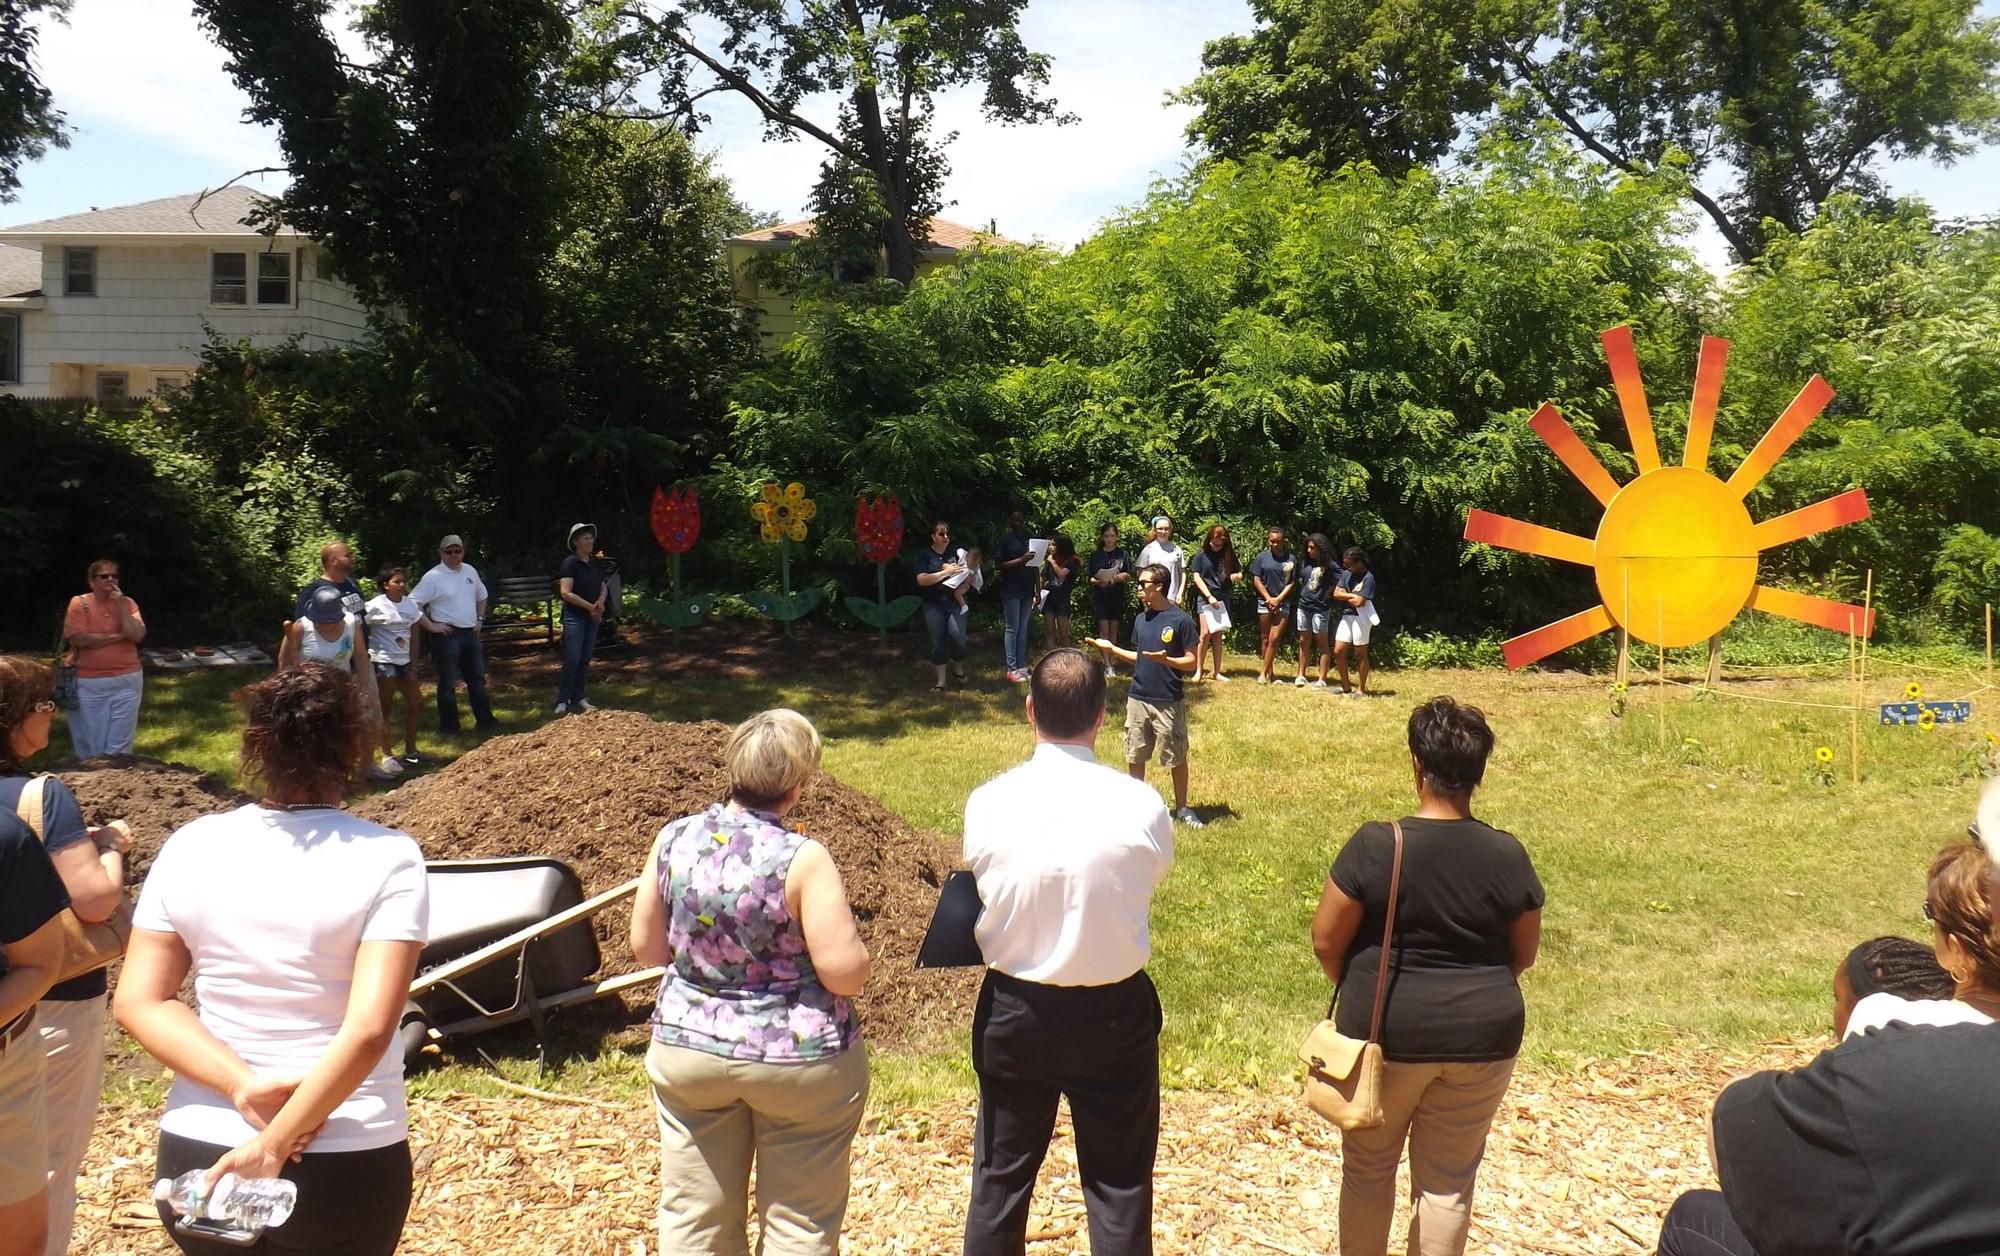 The Baldwin Civic Association hosted a ceremony on June 21 to open its new community garden behind the Baldwin Historical Society Museum, off Grand Ave. BCA President David Viana, center, welcomed residents and thanked those who helped create the garden.